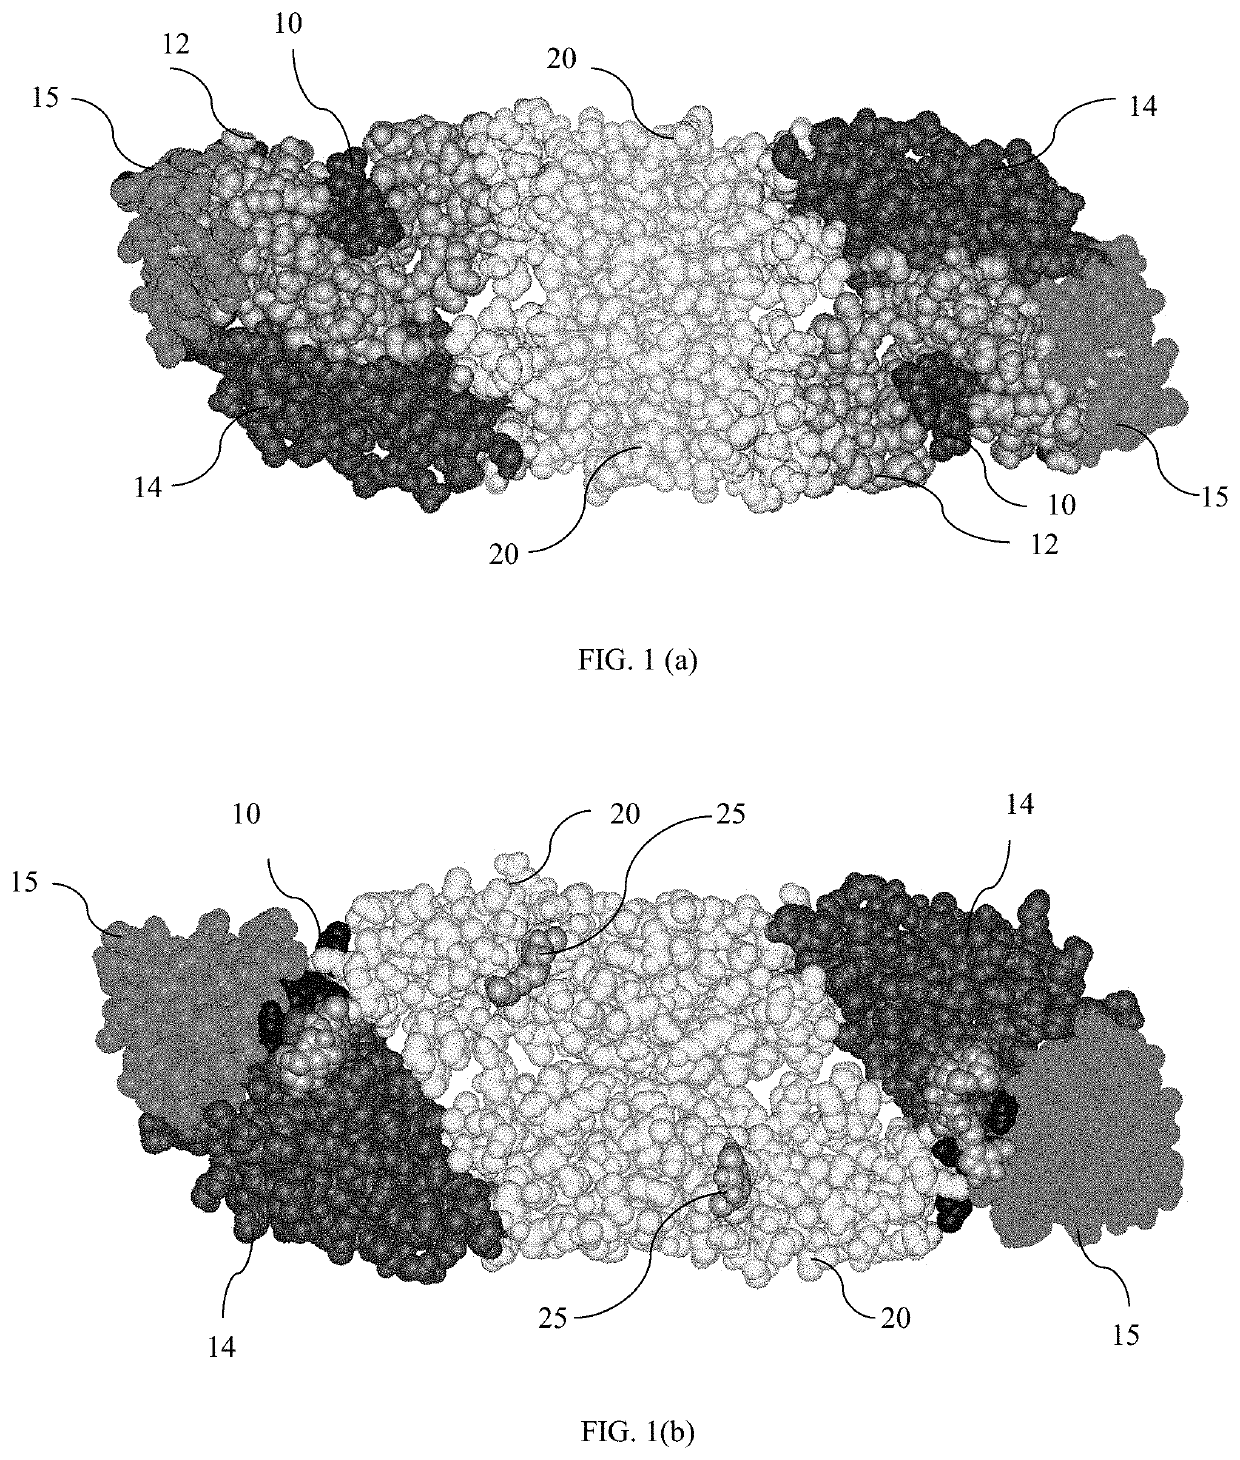 Vaccines and methods for creating a vaccine for inducing immunity to all dengue virus serotypes